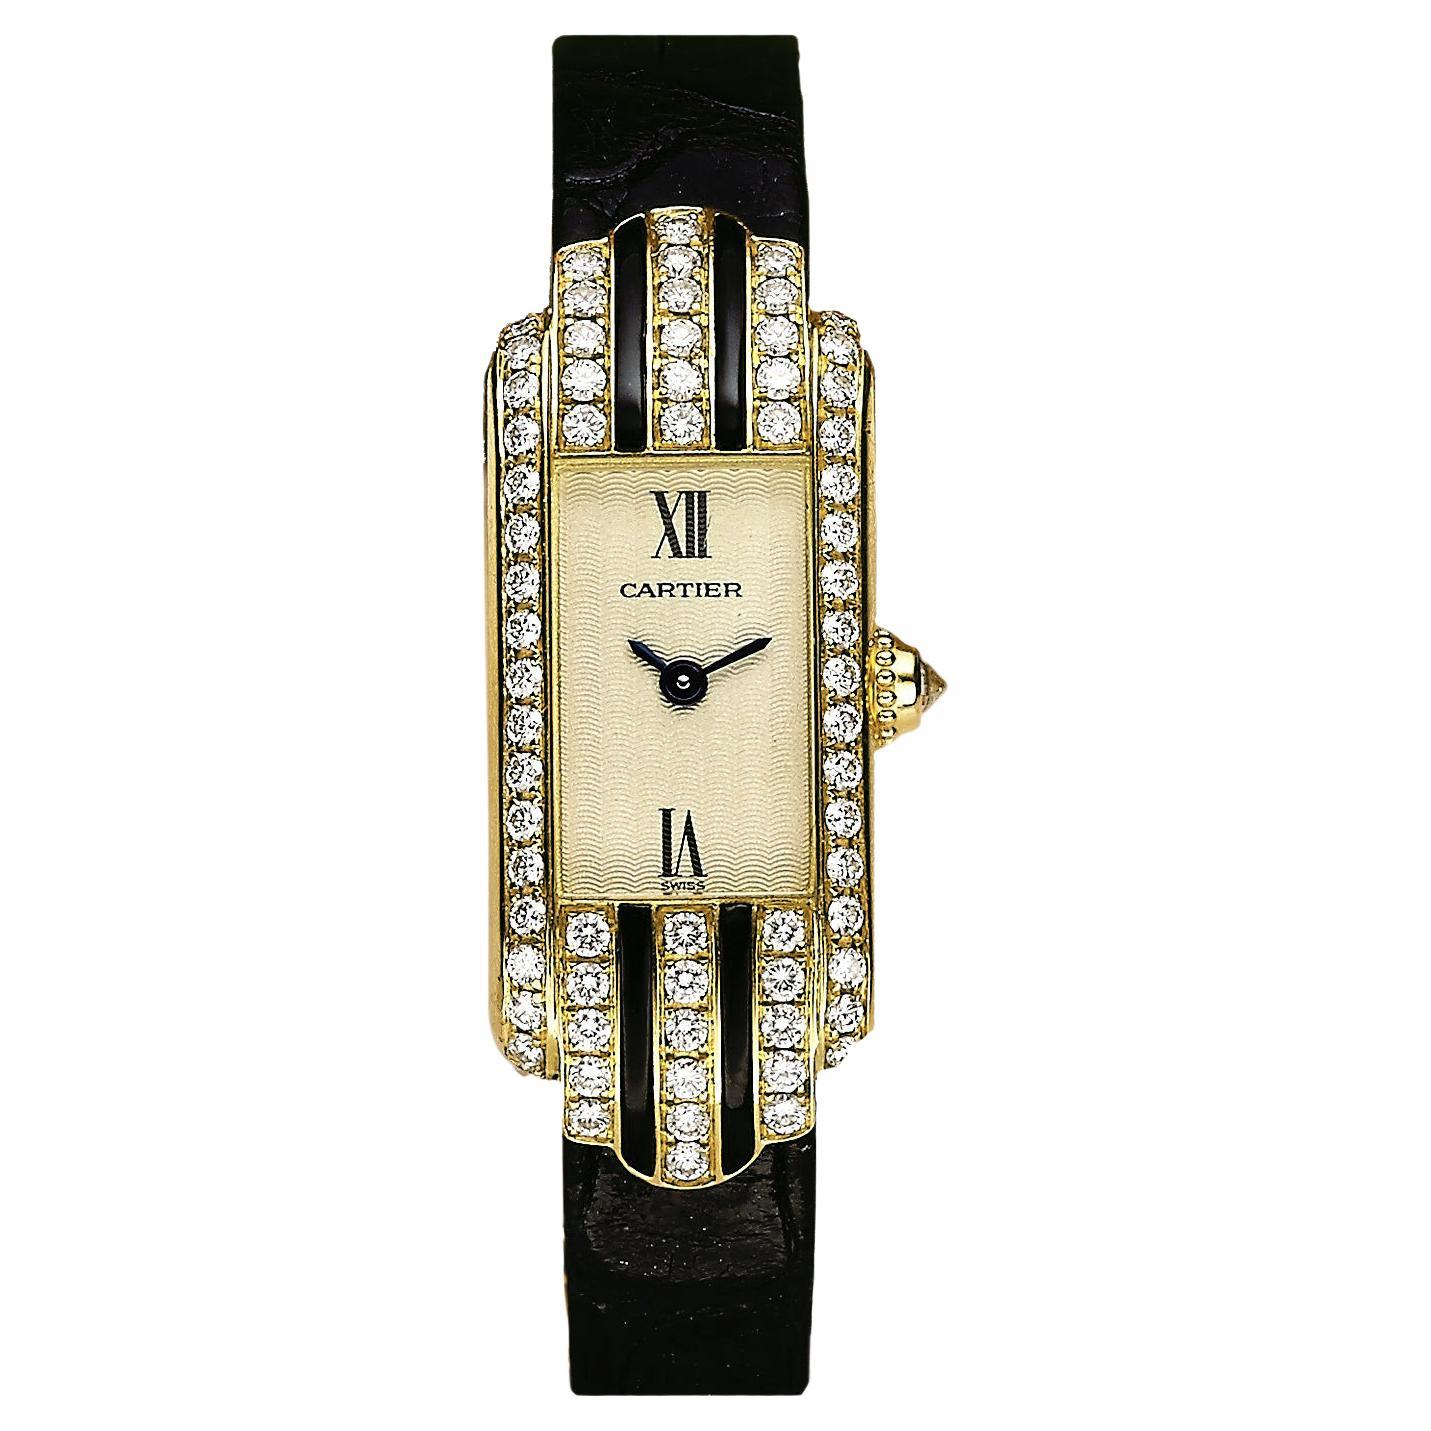 Cartier lady’s Deco-style Tank wristwatch (ref. 1380), featuring a quartz movement; guilloche cream-toned dial with black painted Roman numeral 'XII' and 'VI', as well as blued-steel epee hands; and, 14.4mm x 38mm 18k yellow gold case, framed by